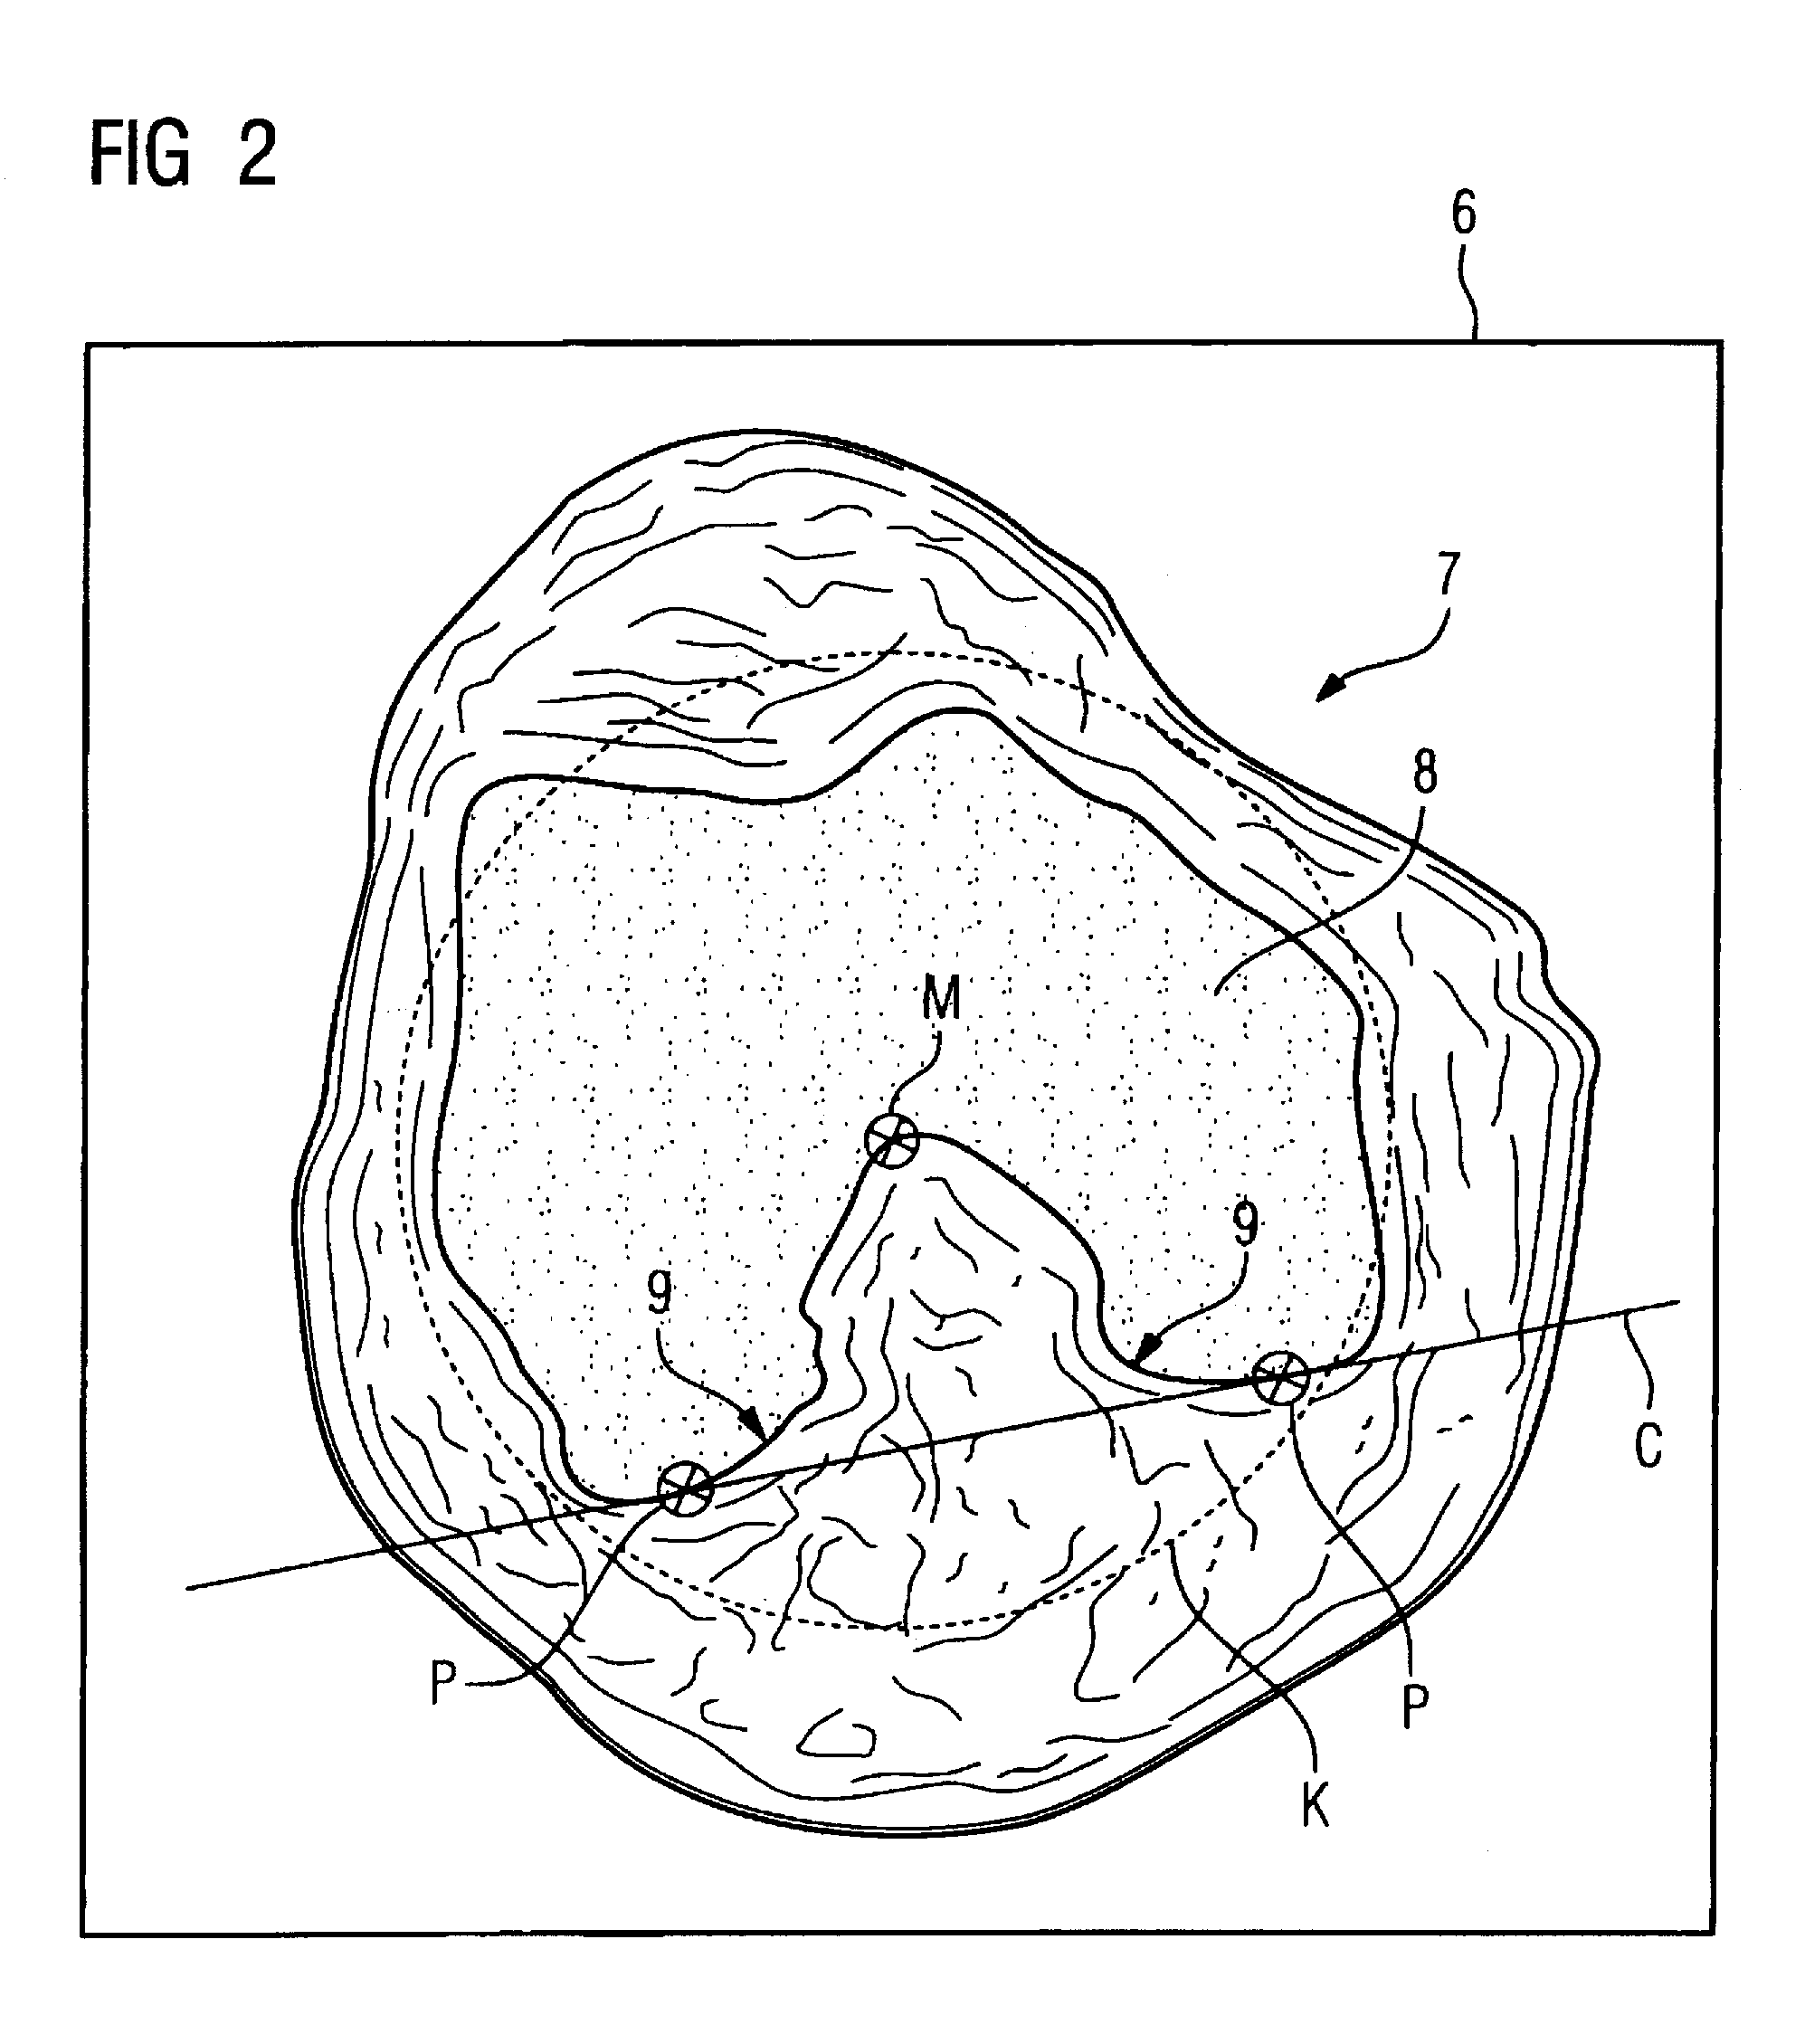 Mr method and apparatus for determining coronal and sagittal image planes from an image data set of a knee joint